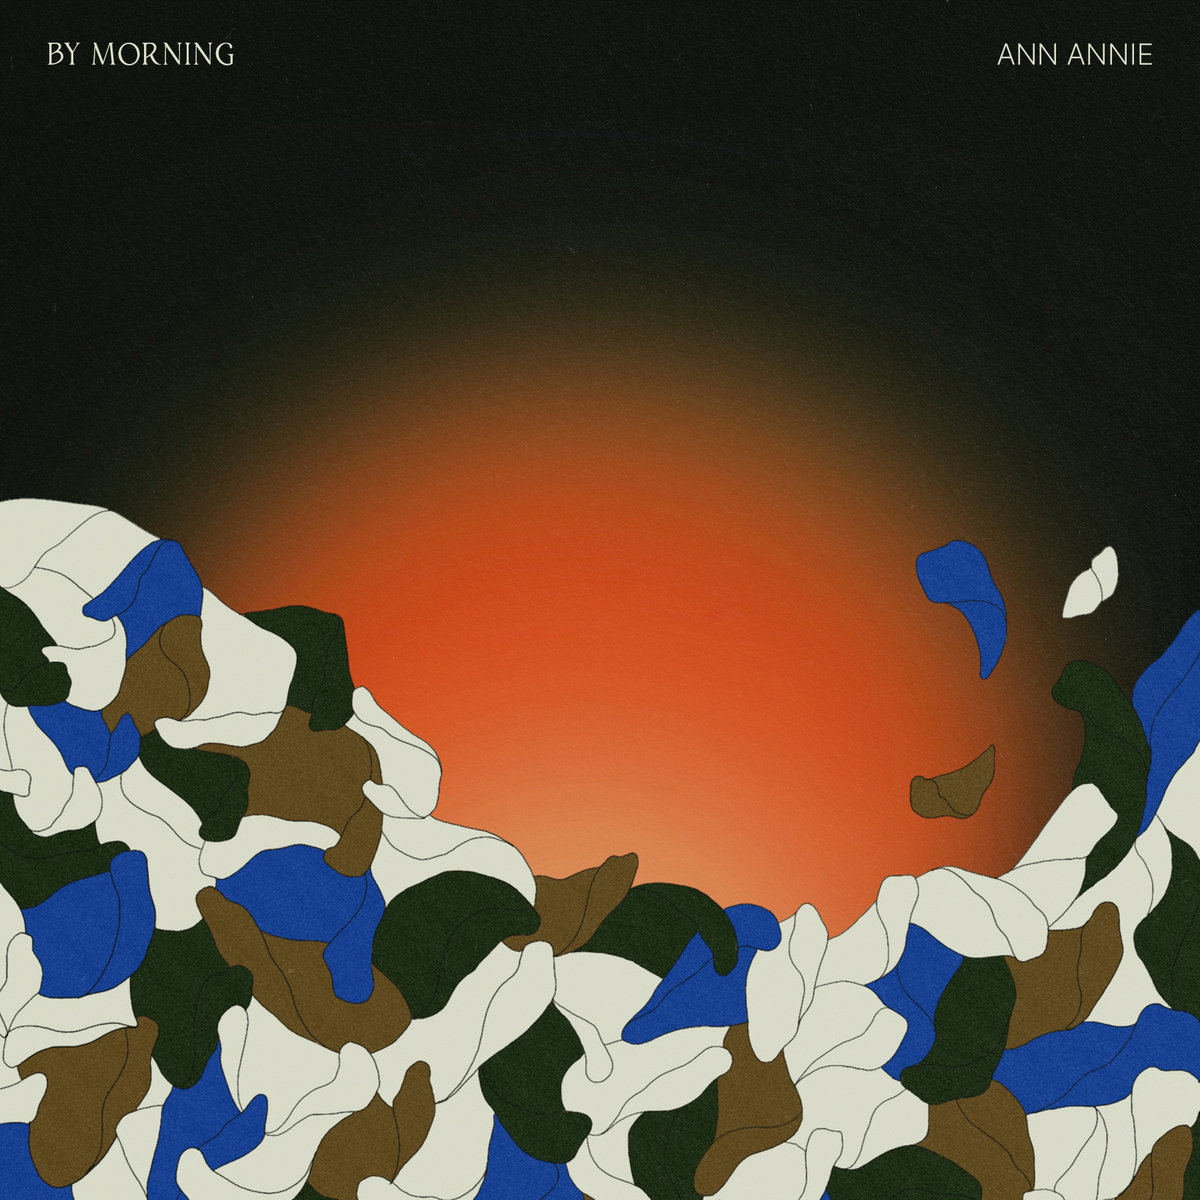 By Morning
by ann annie annannie.bandcamp.com/album/by-morni… 

#Bandcamp #Music #ModularEurorack #ambient #AmbientCountry #AmbientElectronic #AmbientFolk #CosmicCountry #Meditation #TapeMusic #Soundscape #Portland #NYC #Brooklyn #Queens #Bronx #StatenIsland #LongIsland #SaturdayVibes